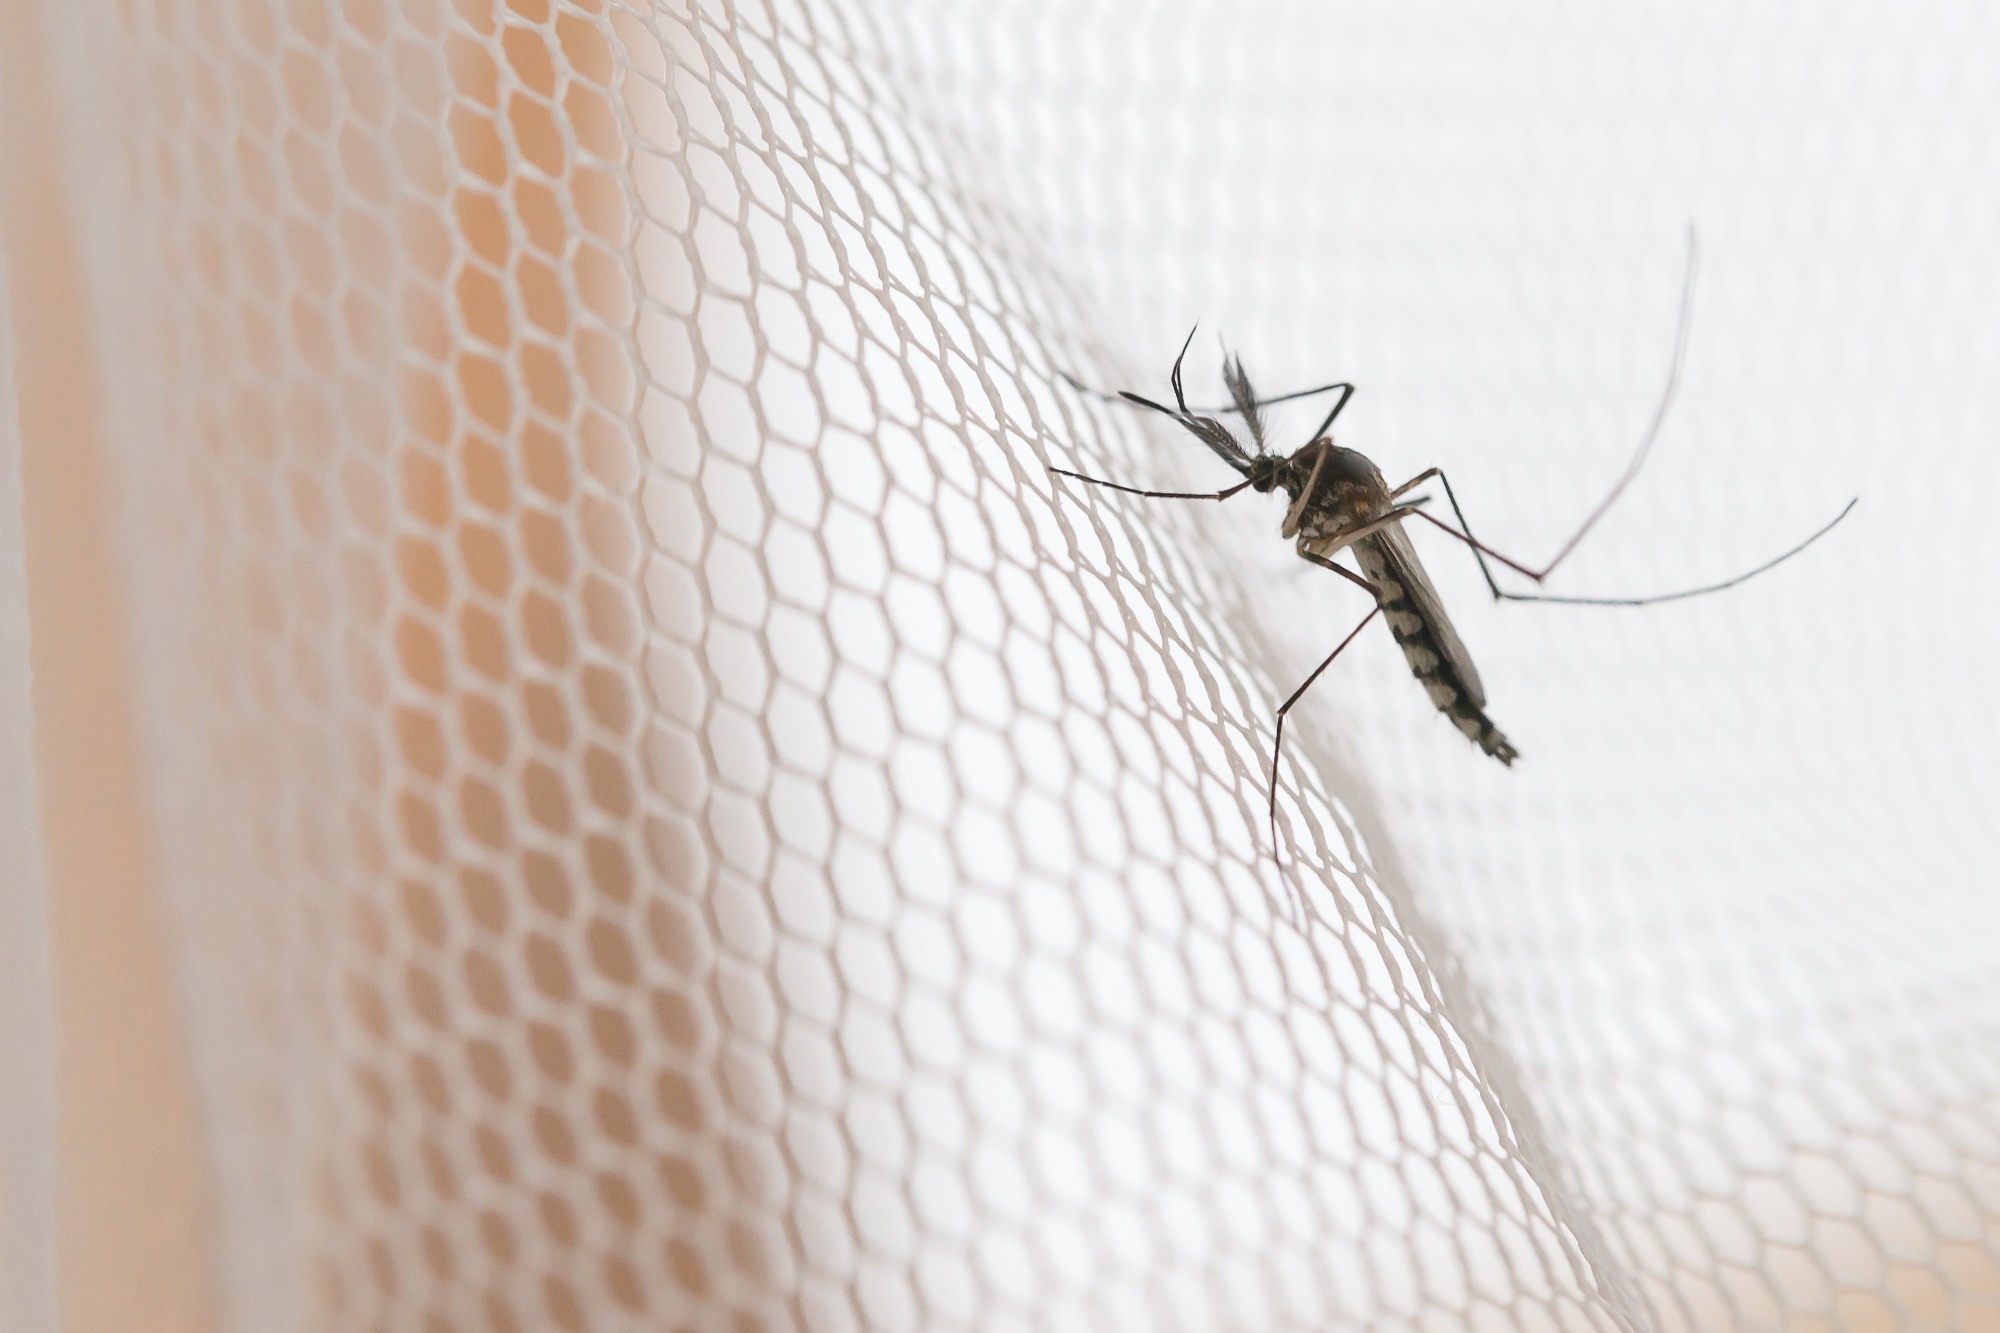 Study: Pooled prevalence and risk factors of malaria among children aged 6–59 months in 13 sub-Saharan African countries: A multilevel analysis using recent malaria indicator surveys. Image Credit: GrooveZ/Shutterstock.com